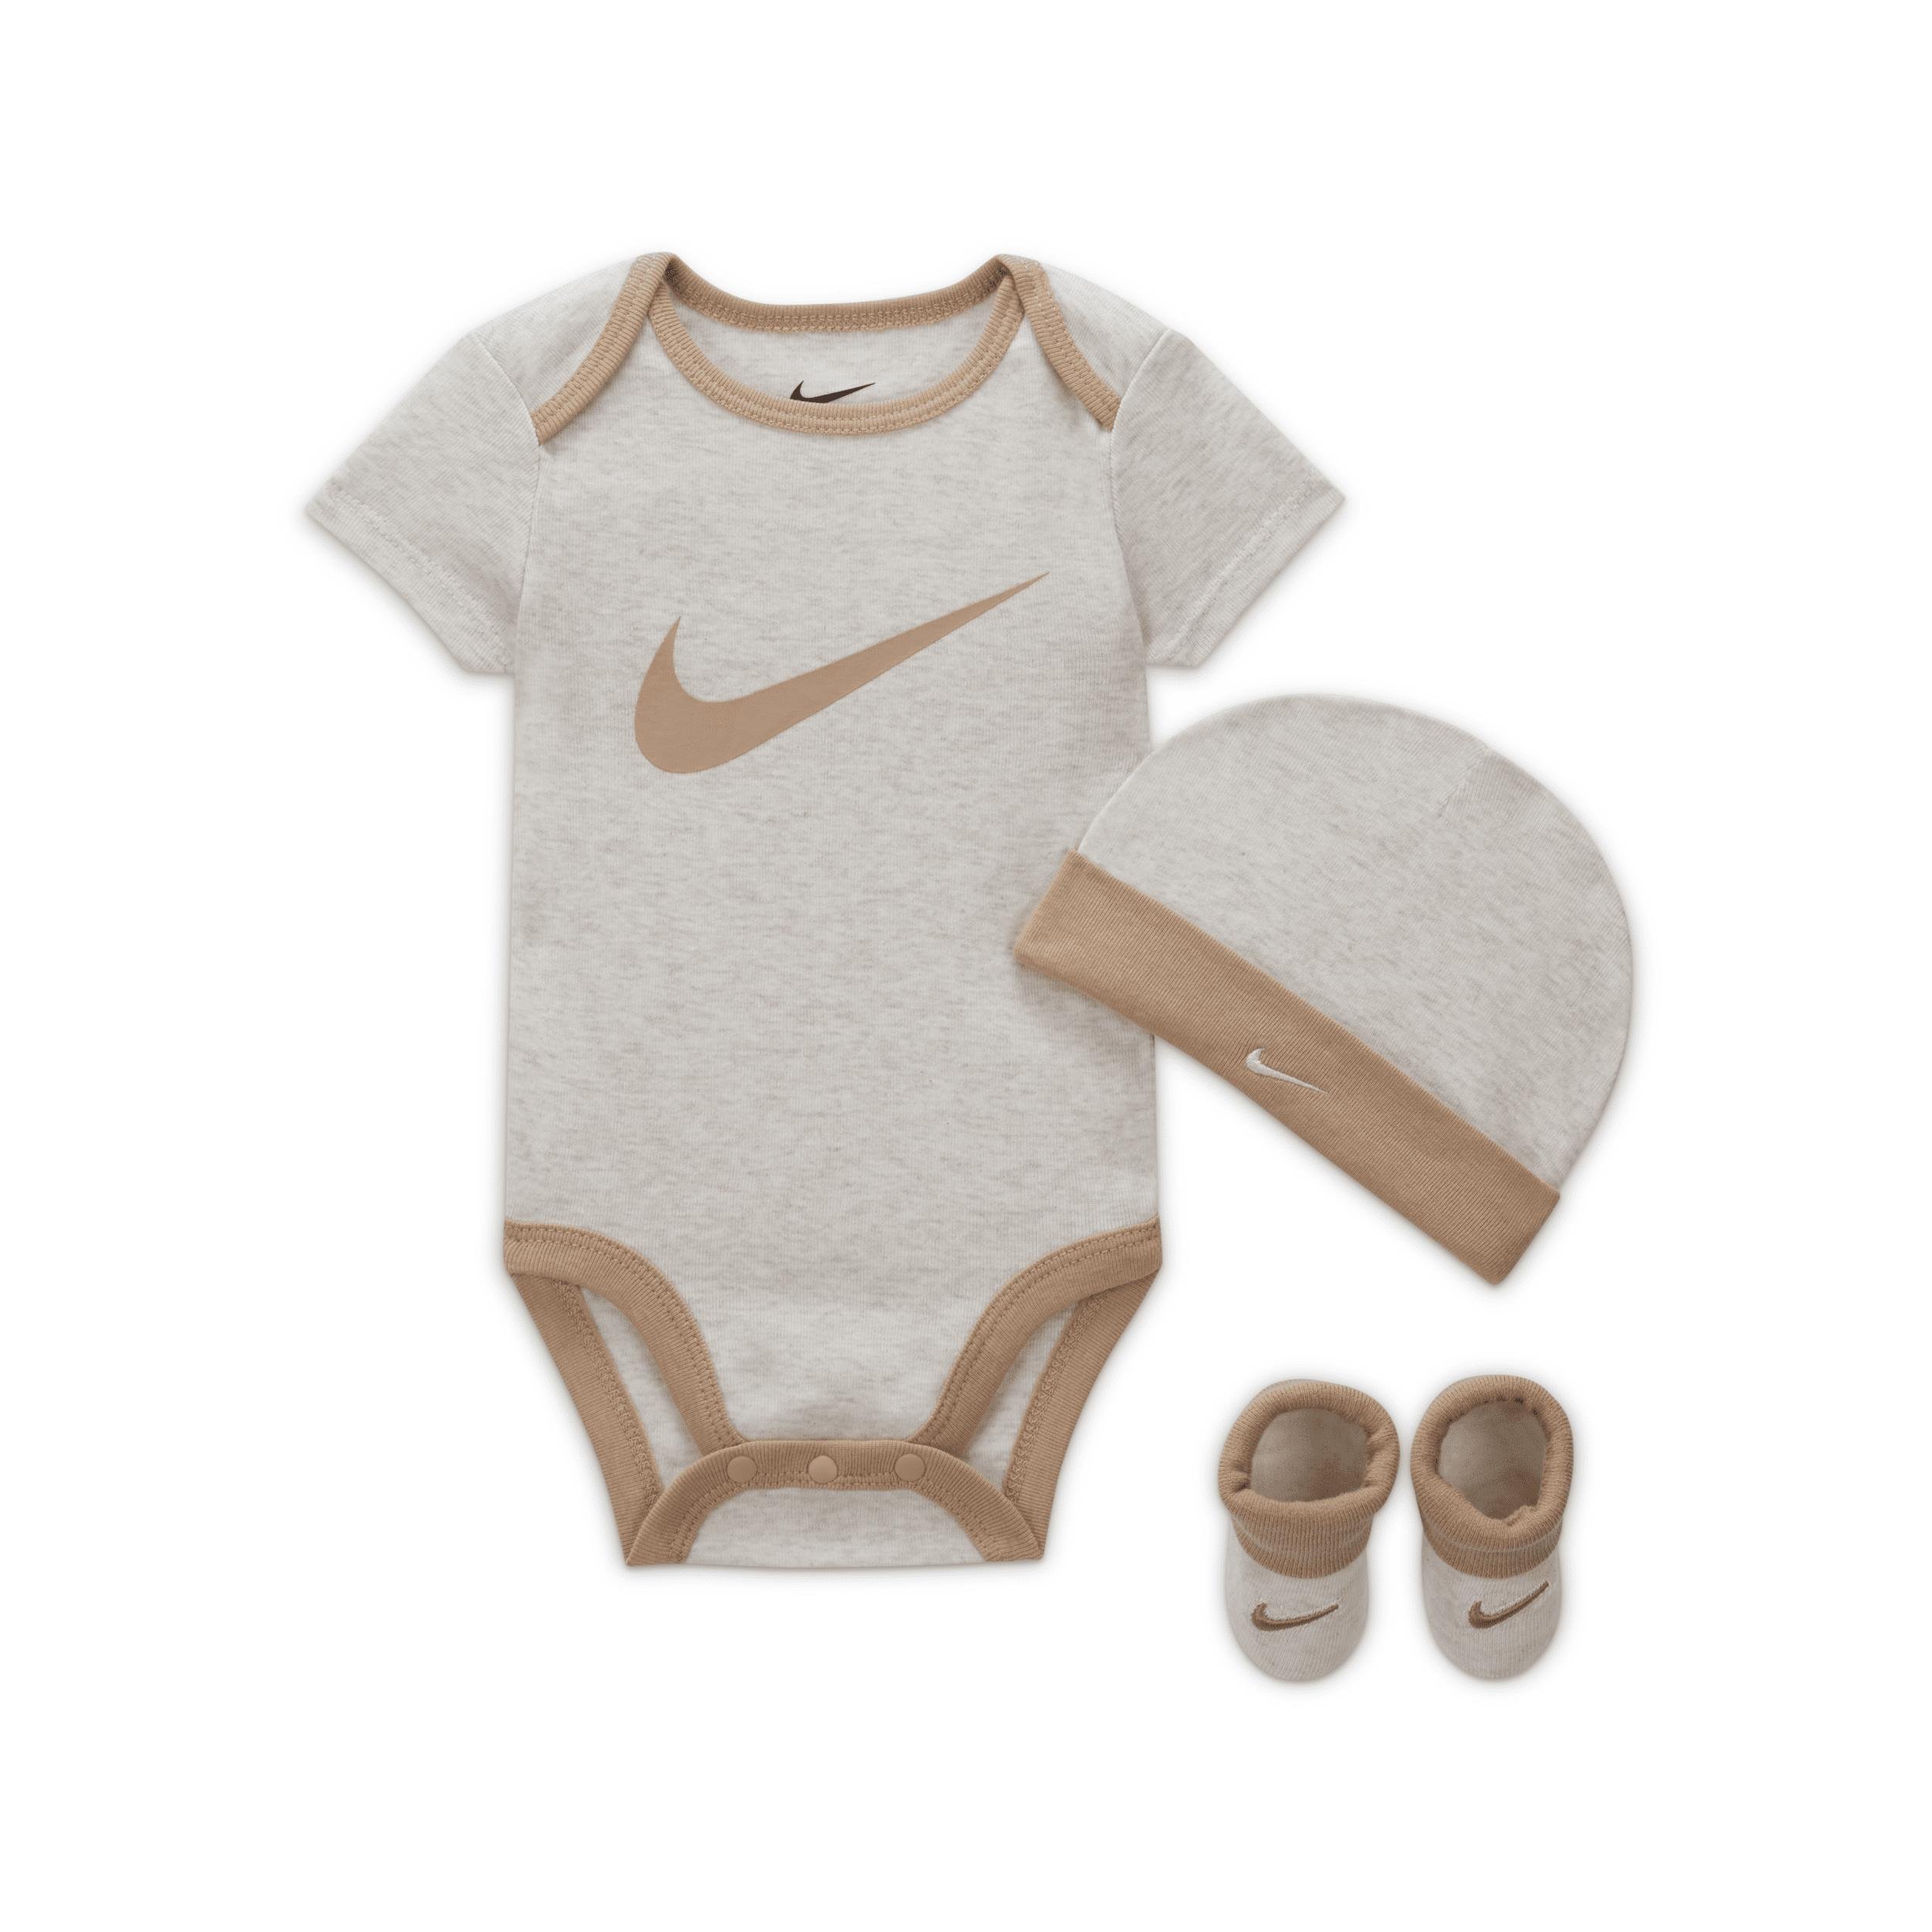 Nike Baby (0-6M) Bodysuit, Hat and Booties Box Set by NIKE